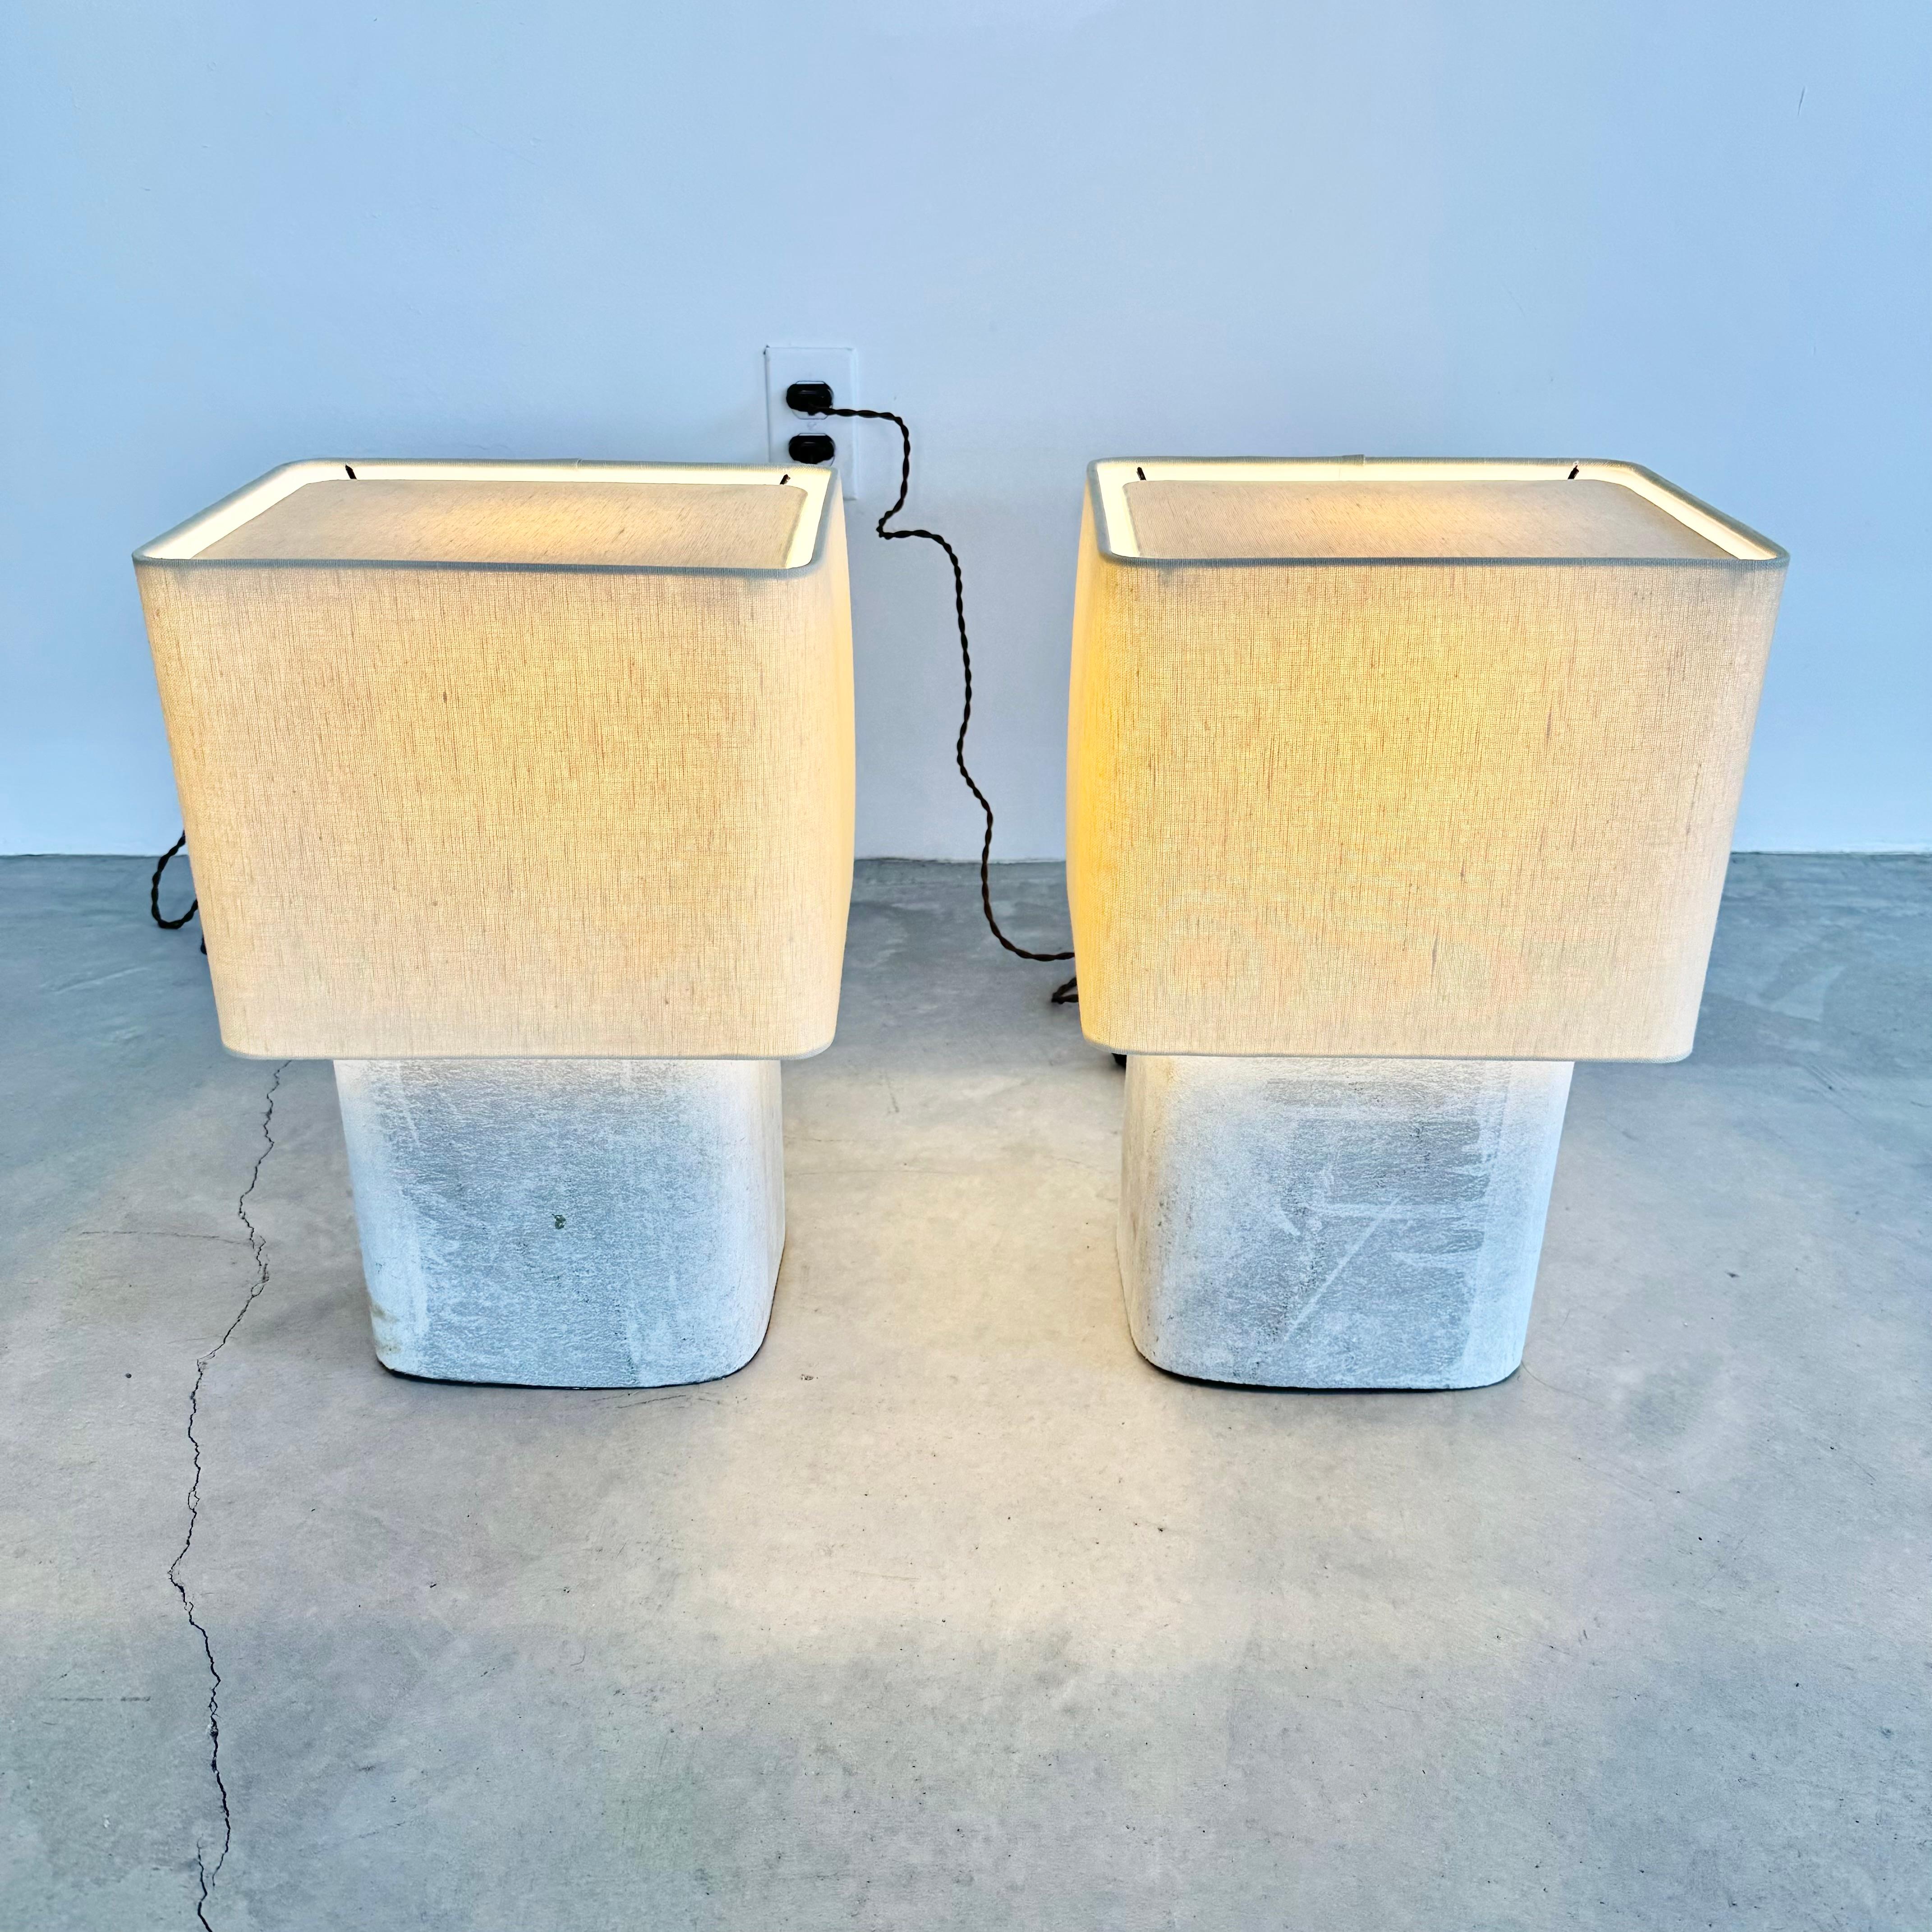 Stunning pair concrete Willy Guhl lamps by Eternit with teak top cover. Concrete made in Swizterland. Newly fitted as a lamp, re-wired with a new custom linen shade with rounded edges and light diffusor on top. Stunning simplicity and beautiful